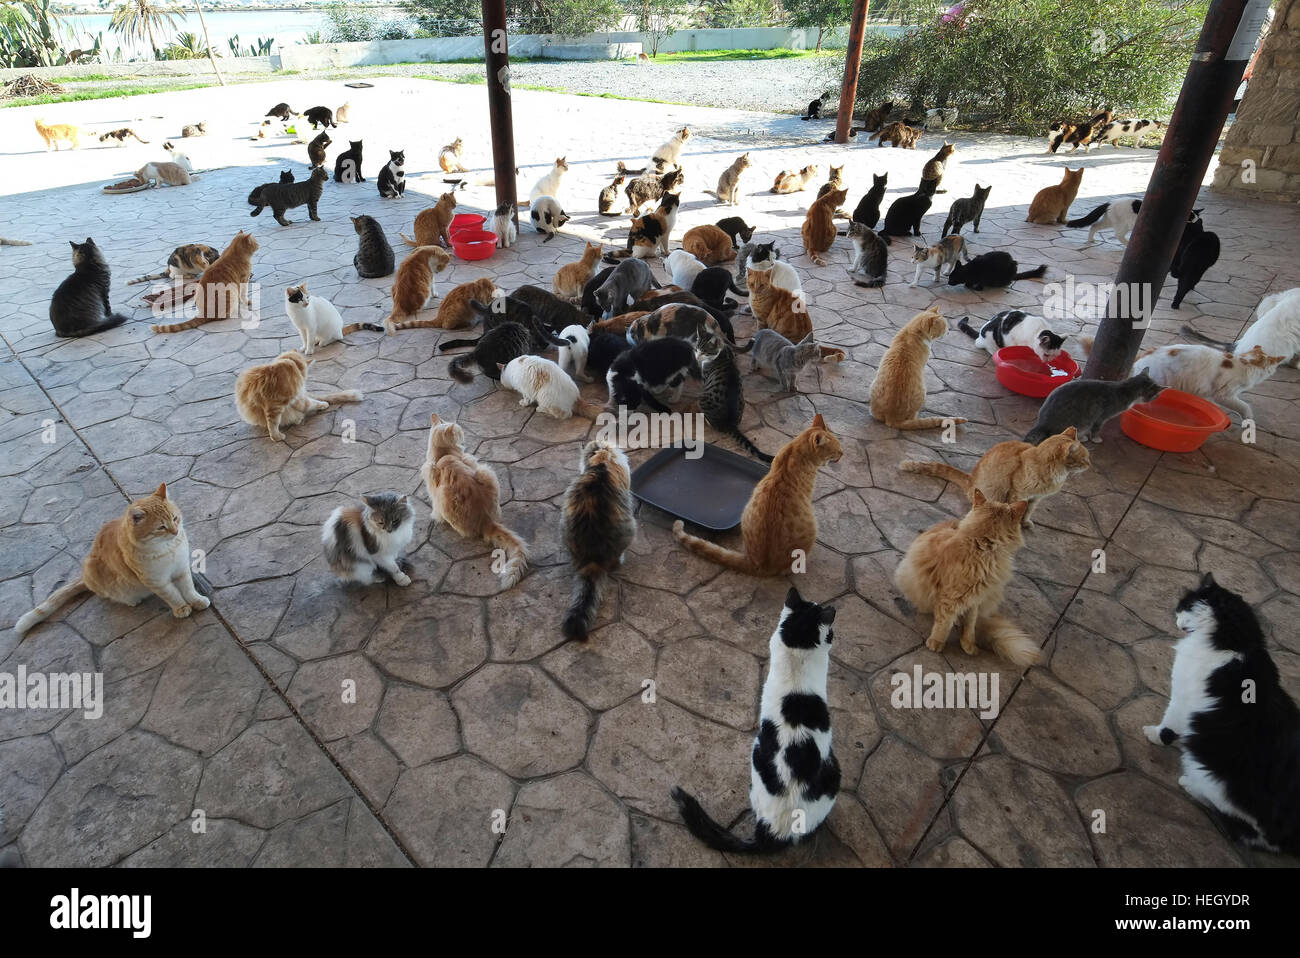 Friends of Larnaca Cats volunteers feed stray cats beside the Hala Sultan Tekke mosque on the shores of Larnaca Lake, Cyprus. Stock Photo